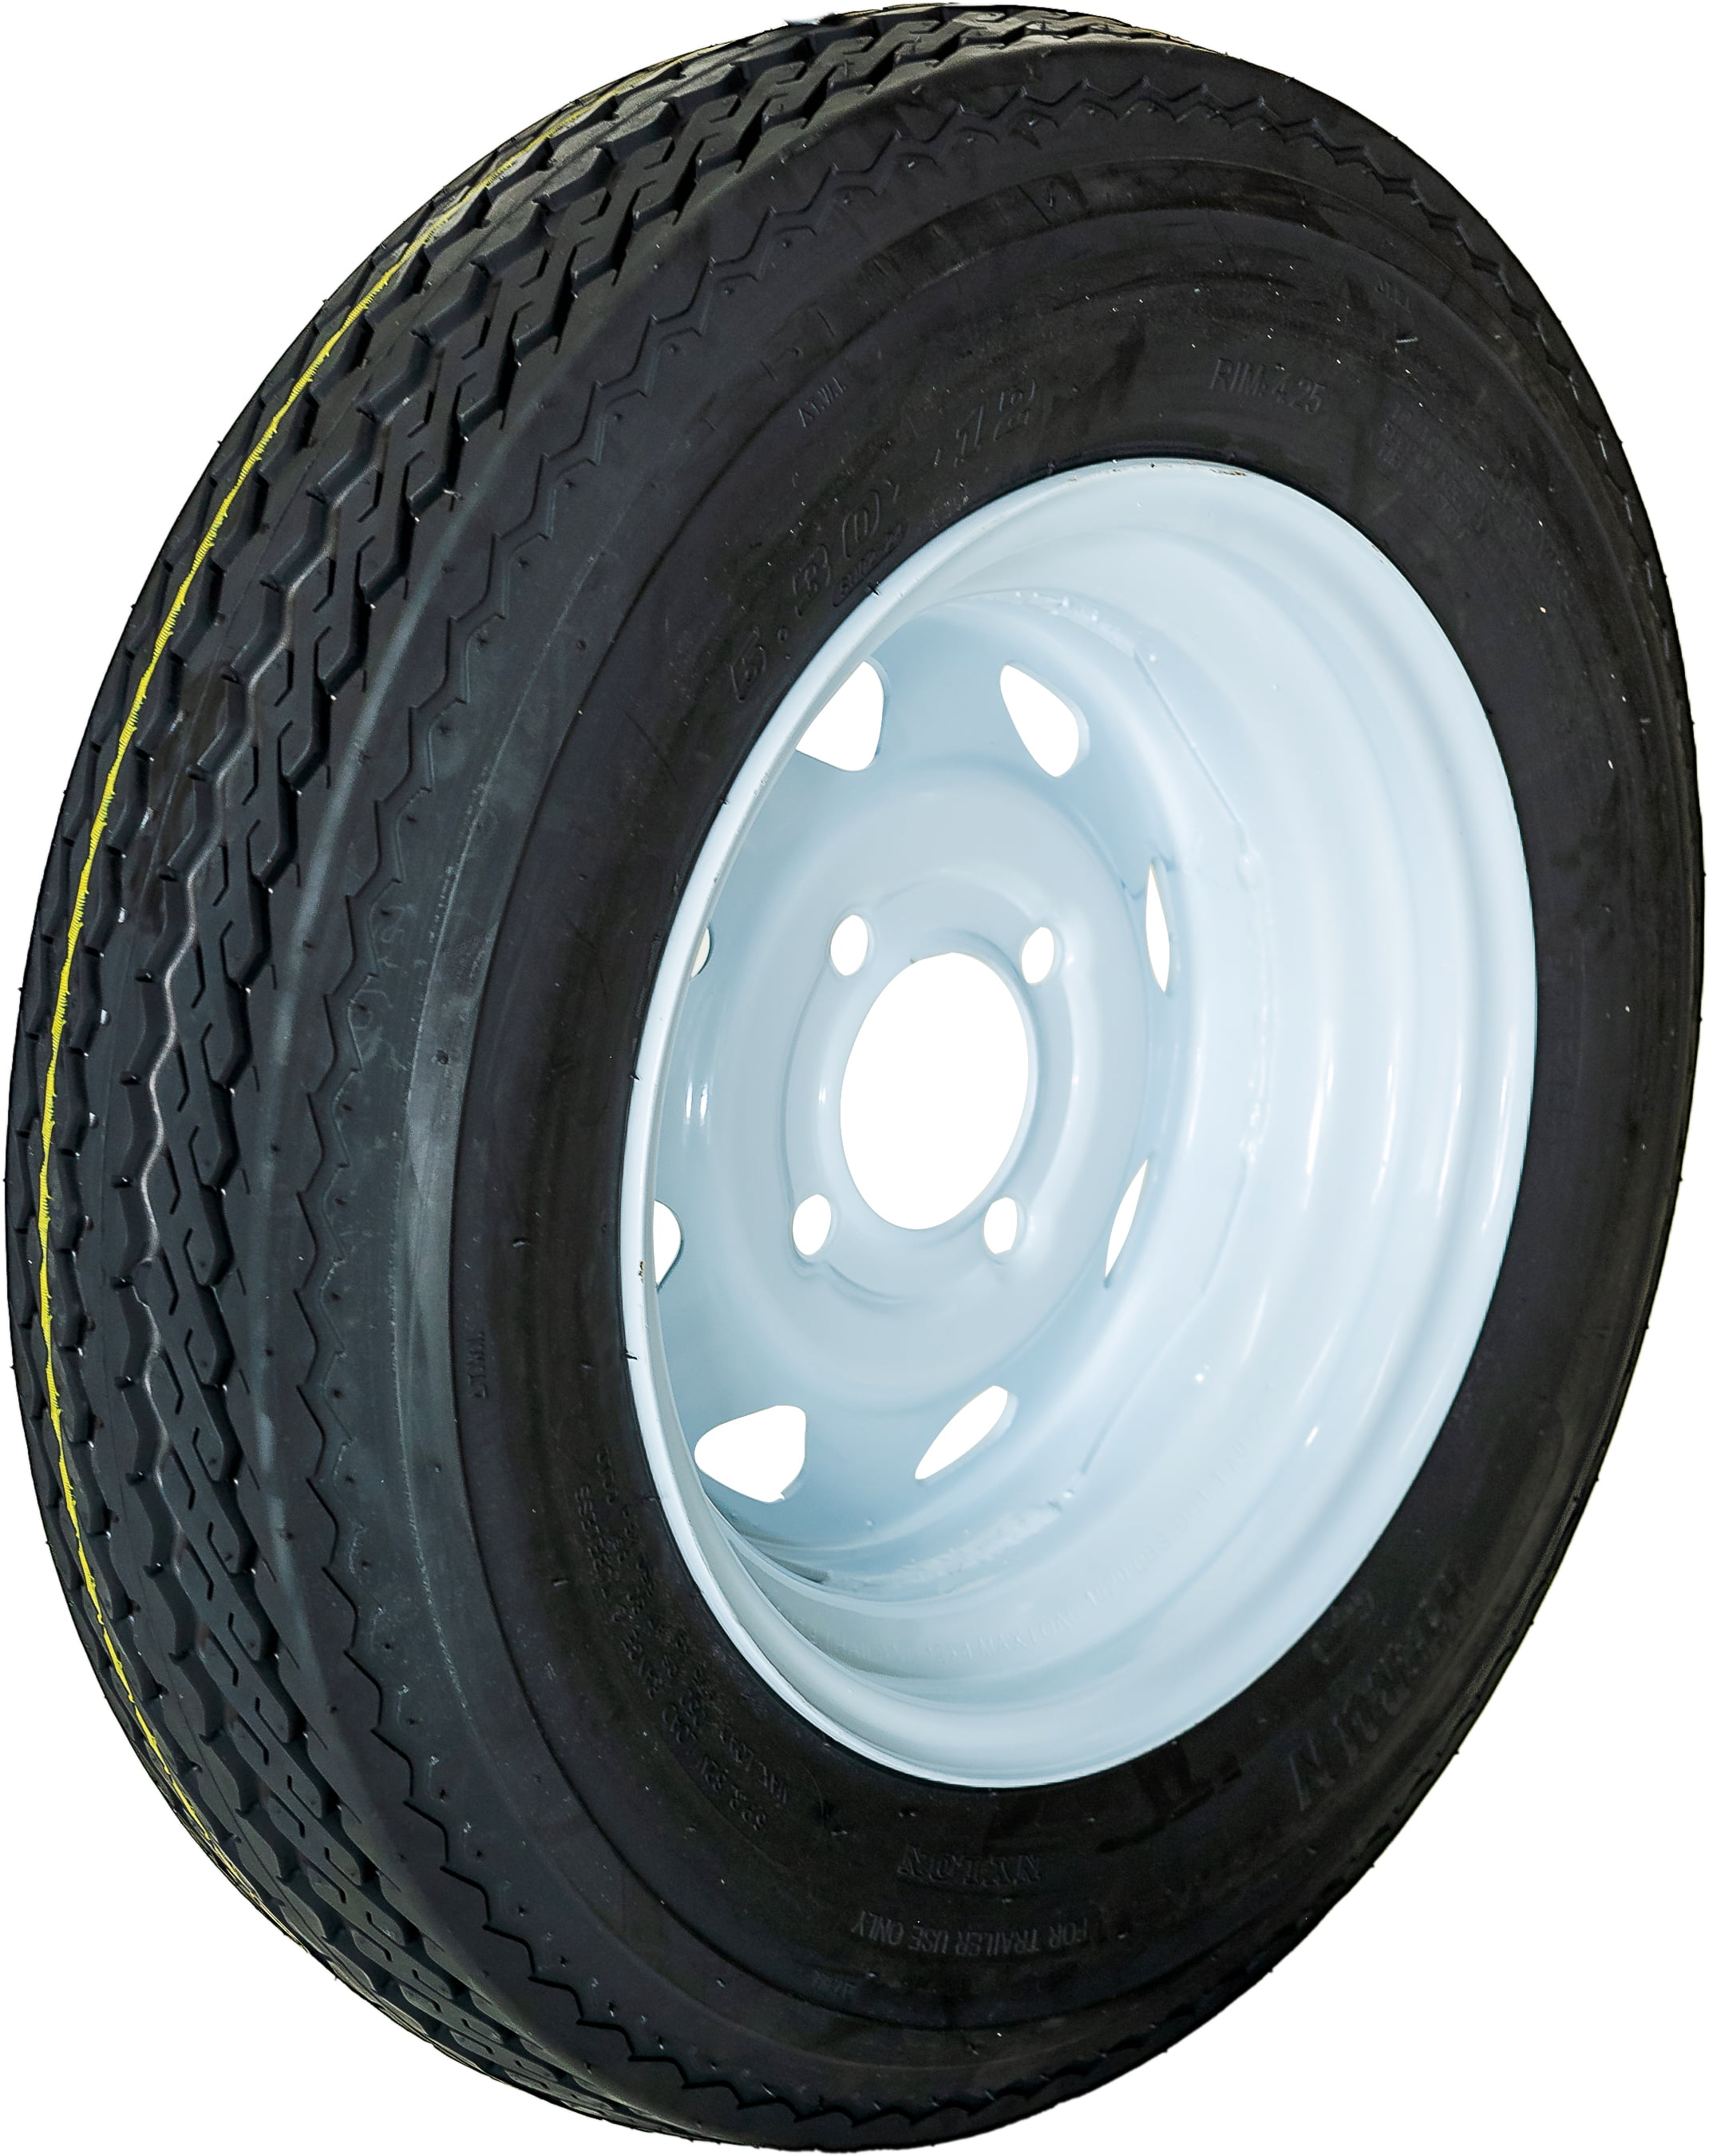 Set of 2 5.30-12 LRC 530/12 6ply rated 530-12 Trailer tire Fits Boats Snowmobile,Ski,utility trailers 